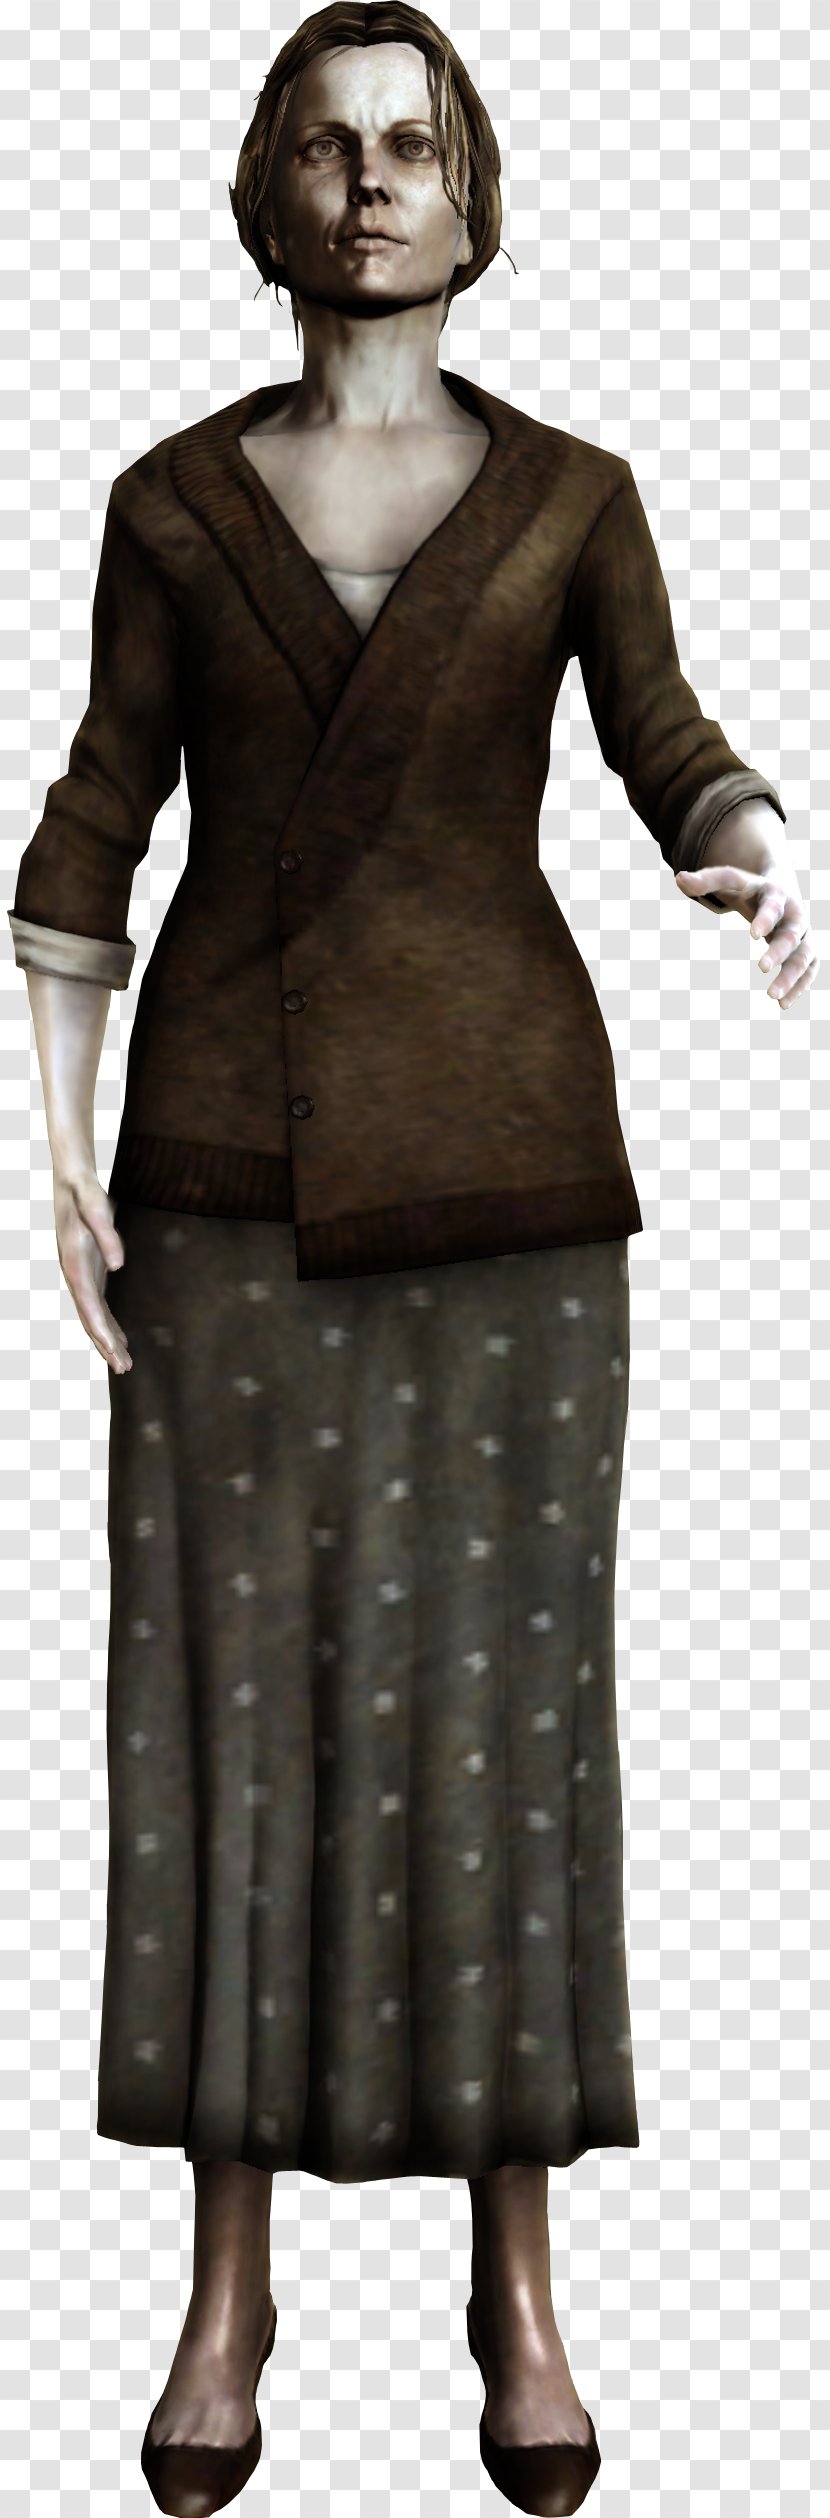 Silent Hill: Homecoming Shepherd's Glen Character Survival Horror Protagonist - Mother Transparent PNG